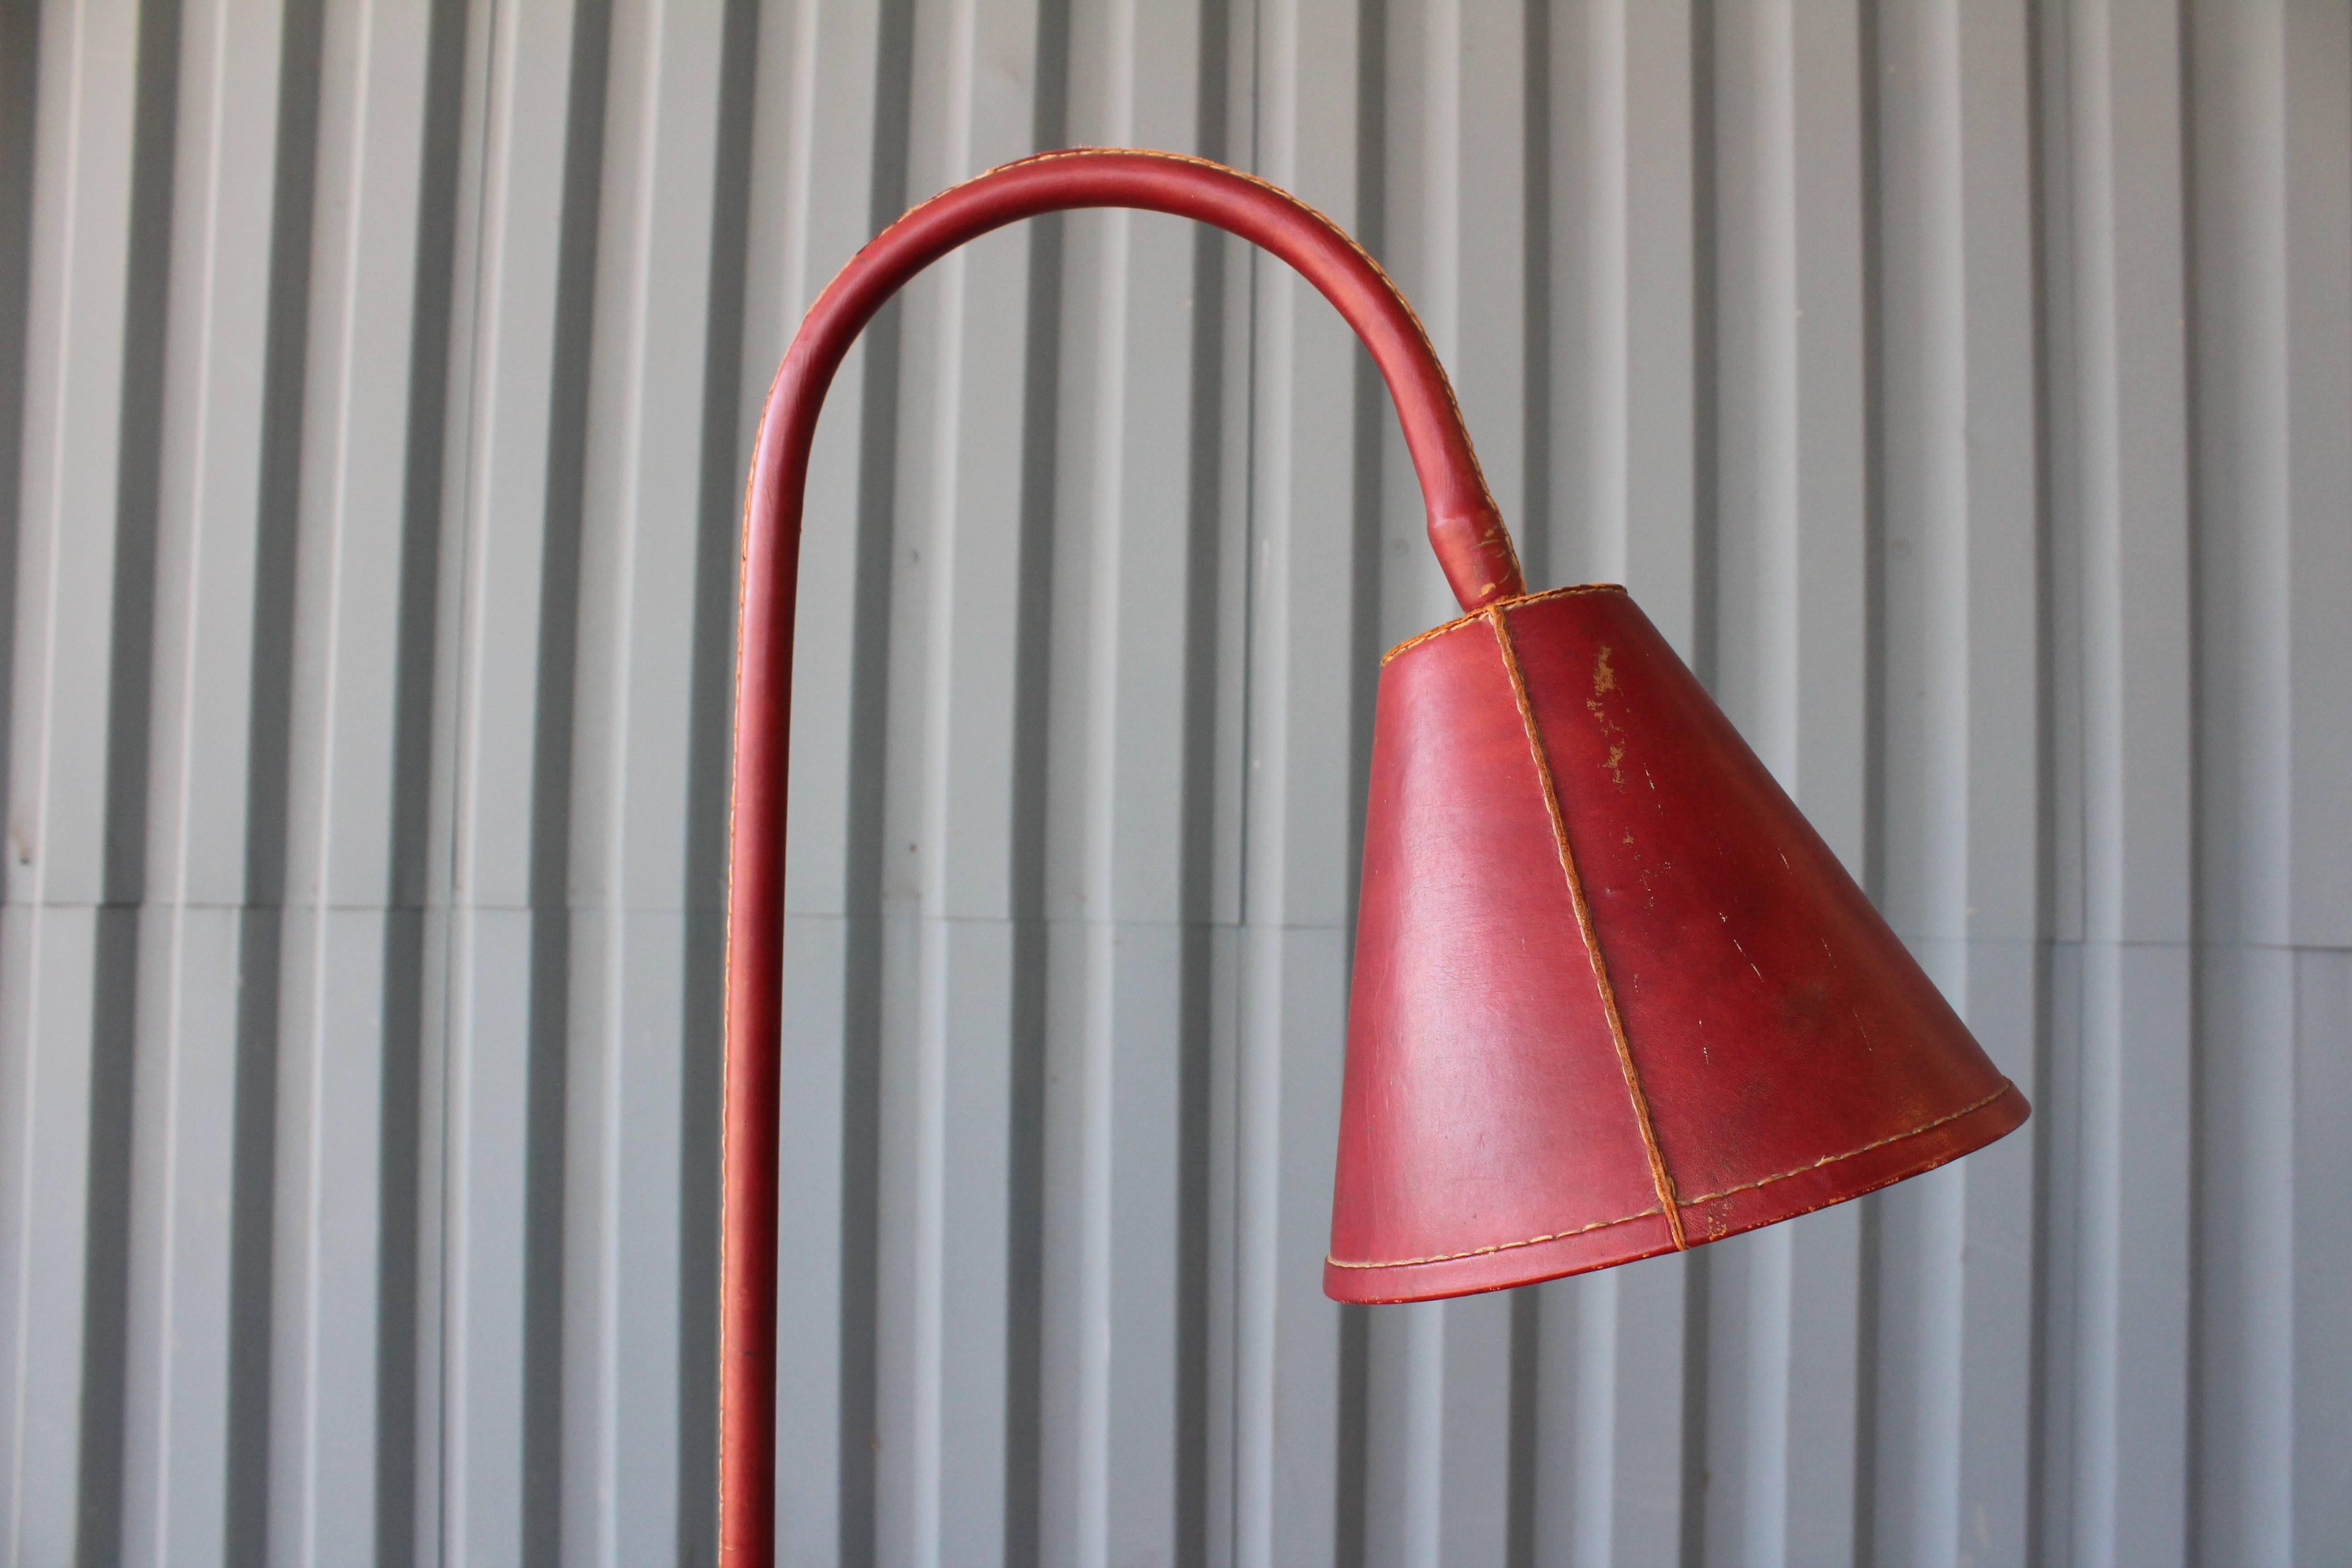 French Jacques Adnet Leather Wrapped Floor Lamp